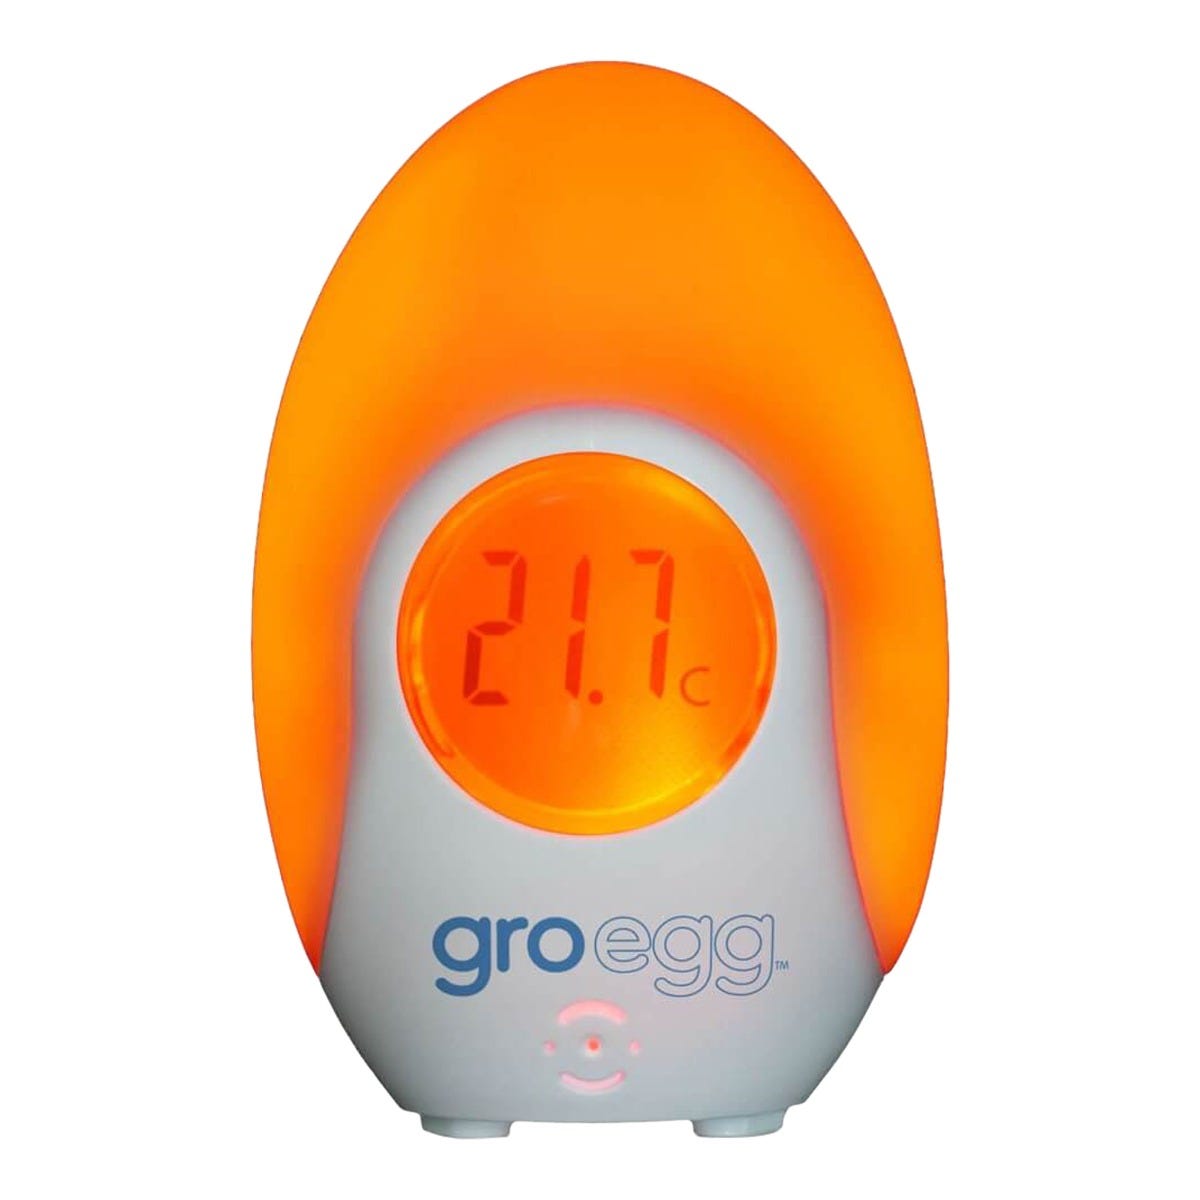 Tommee Tippee Gro Egg USB Thermometer